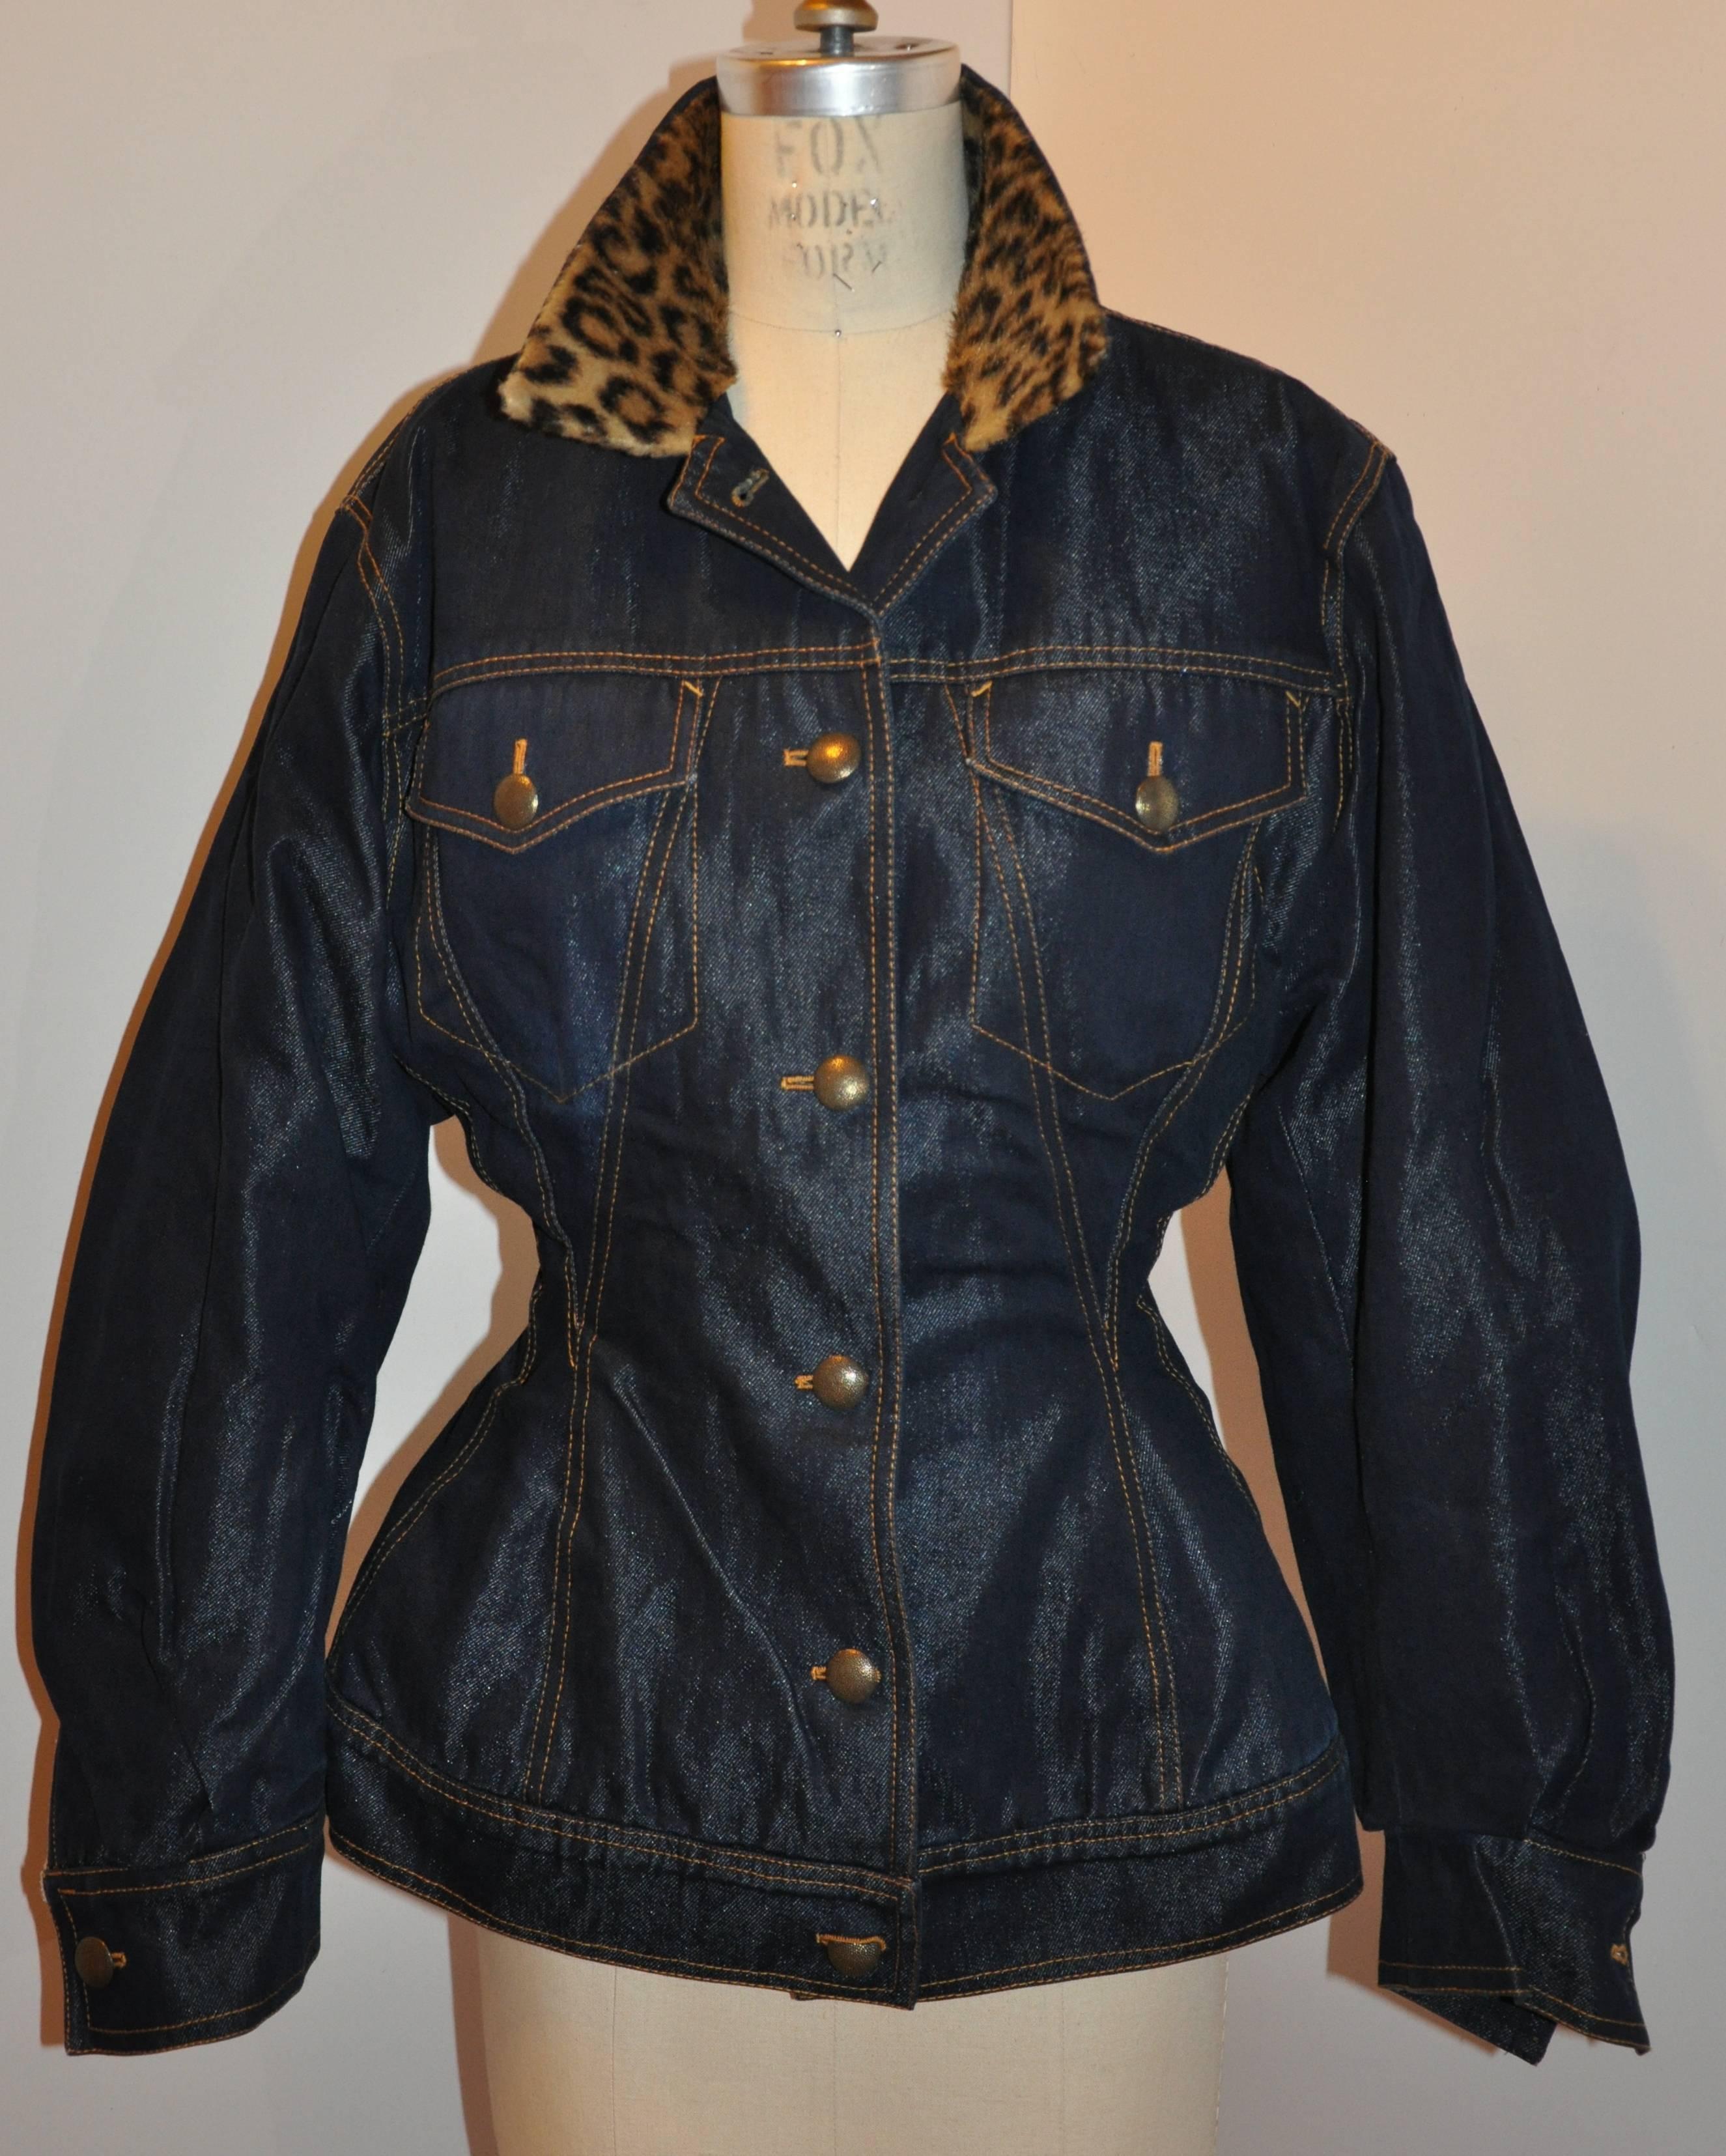 Rare Jean Paul Gaultier Sculpted Denim Jacket with Leopard Collar Button Jacket In Good Condition For Sale In New York, NY